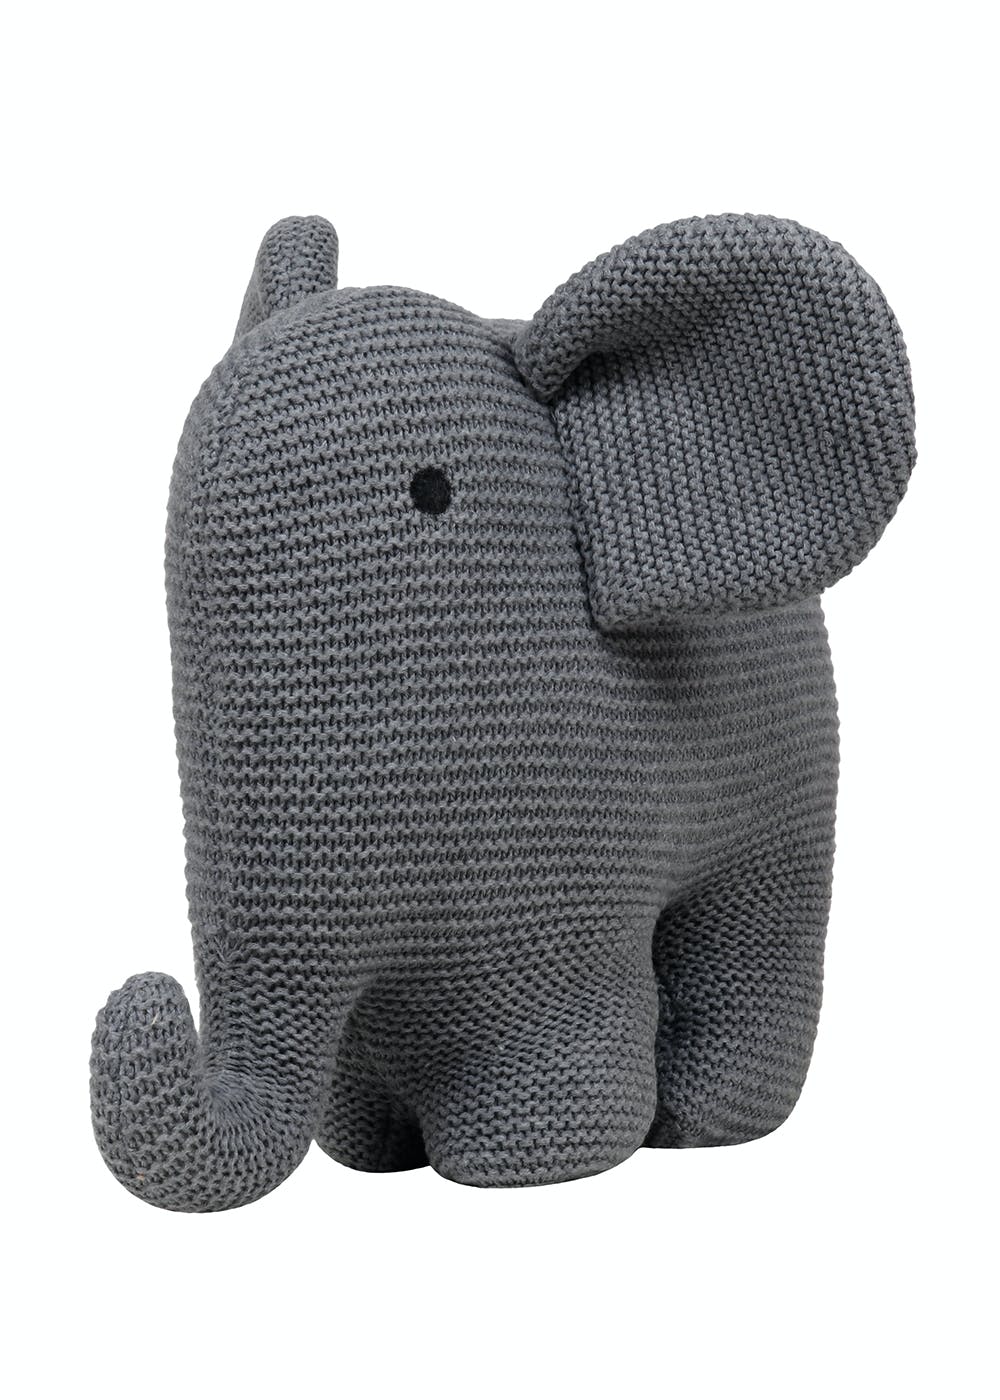 Get Elephant - Grey Mélange Color Cotton Knitted Stuffed Toy at ₹ 1199 ...